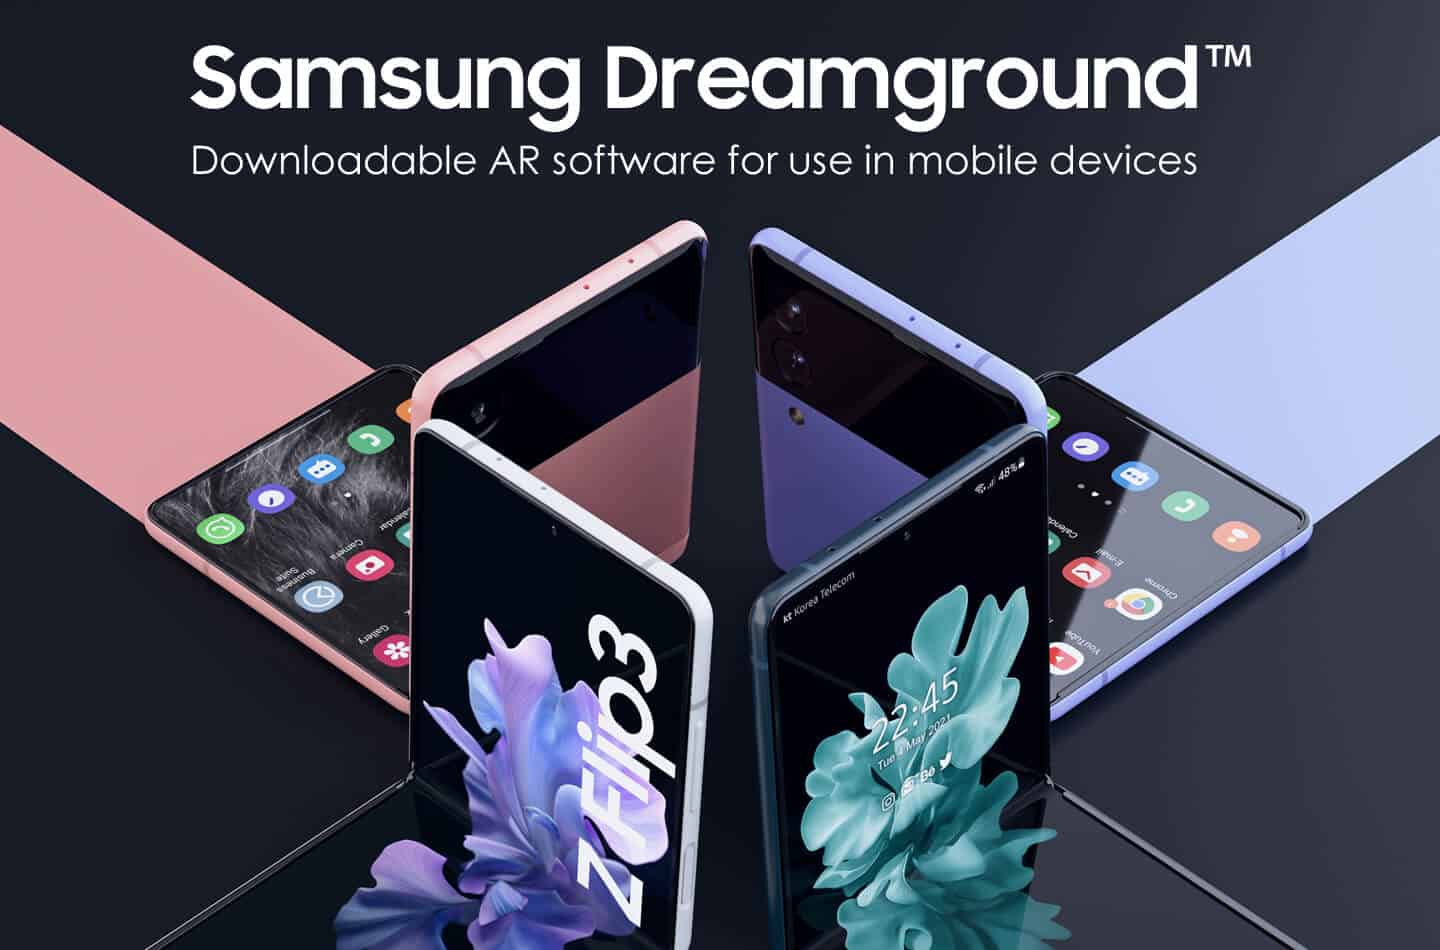 Samsung Dreamground may be their new service for streaming AR games